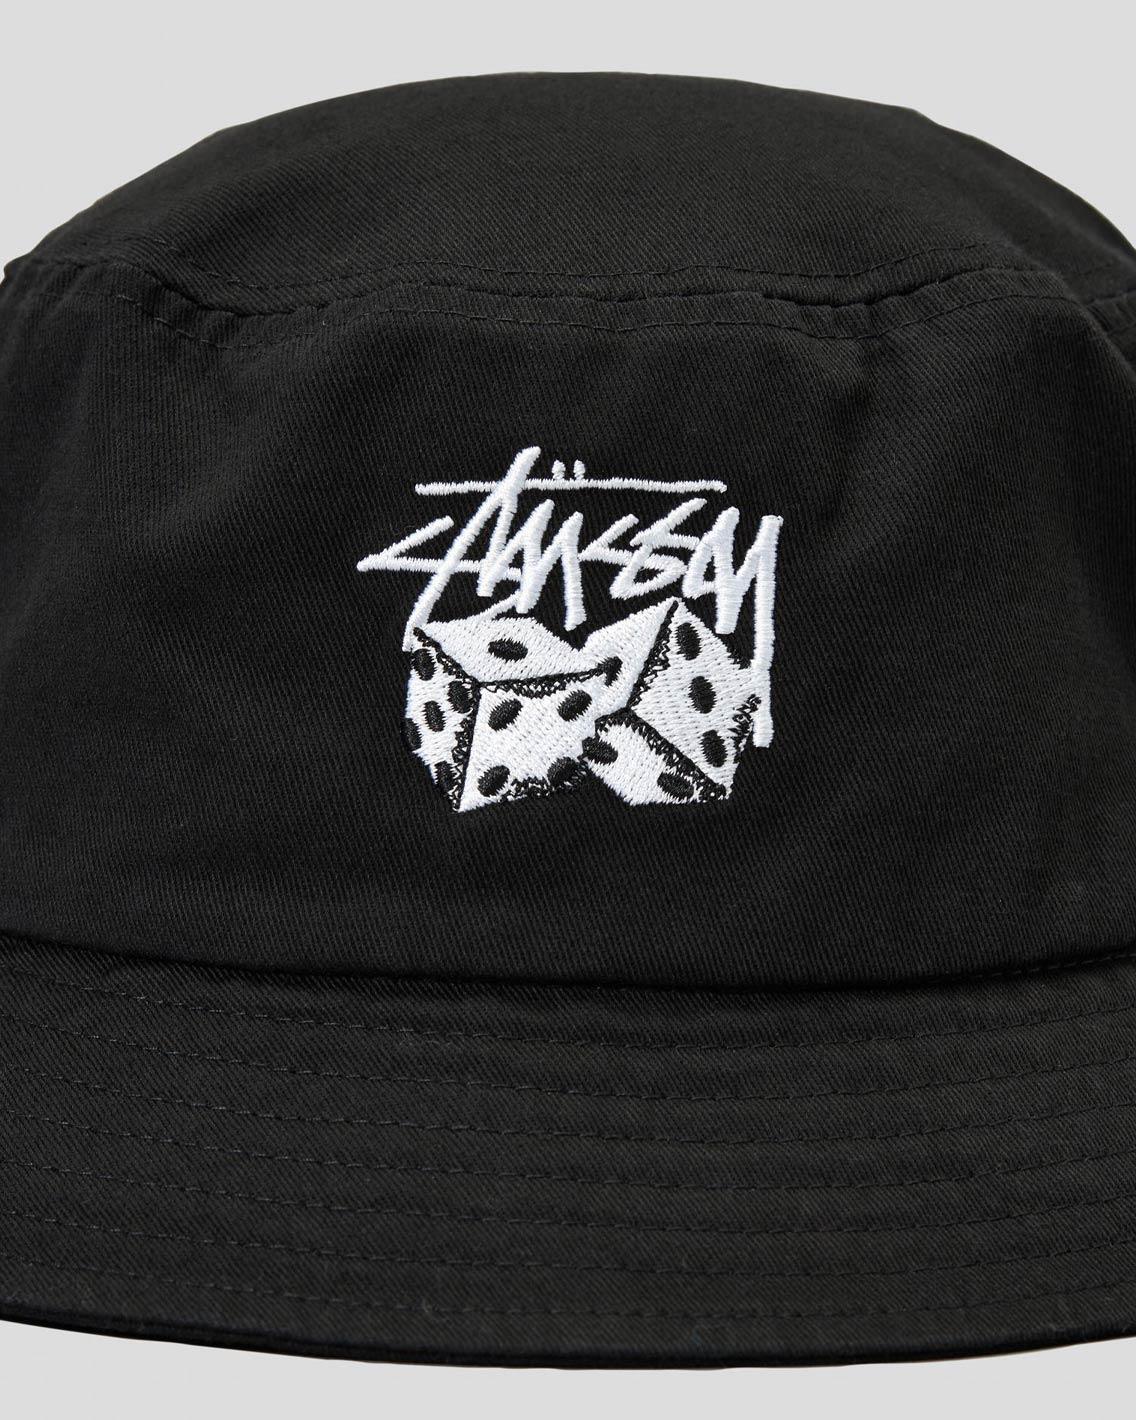 Stussy - Two Dice Washed Bucket Hat - Black Hats Stussy   